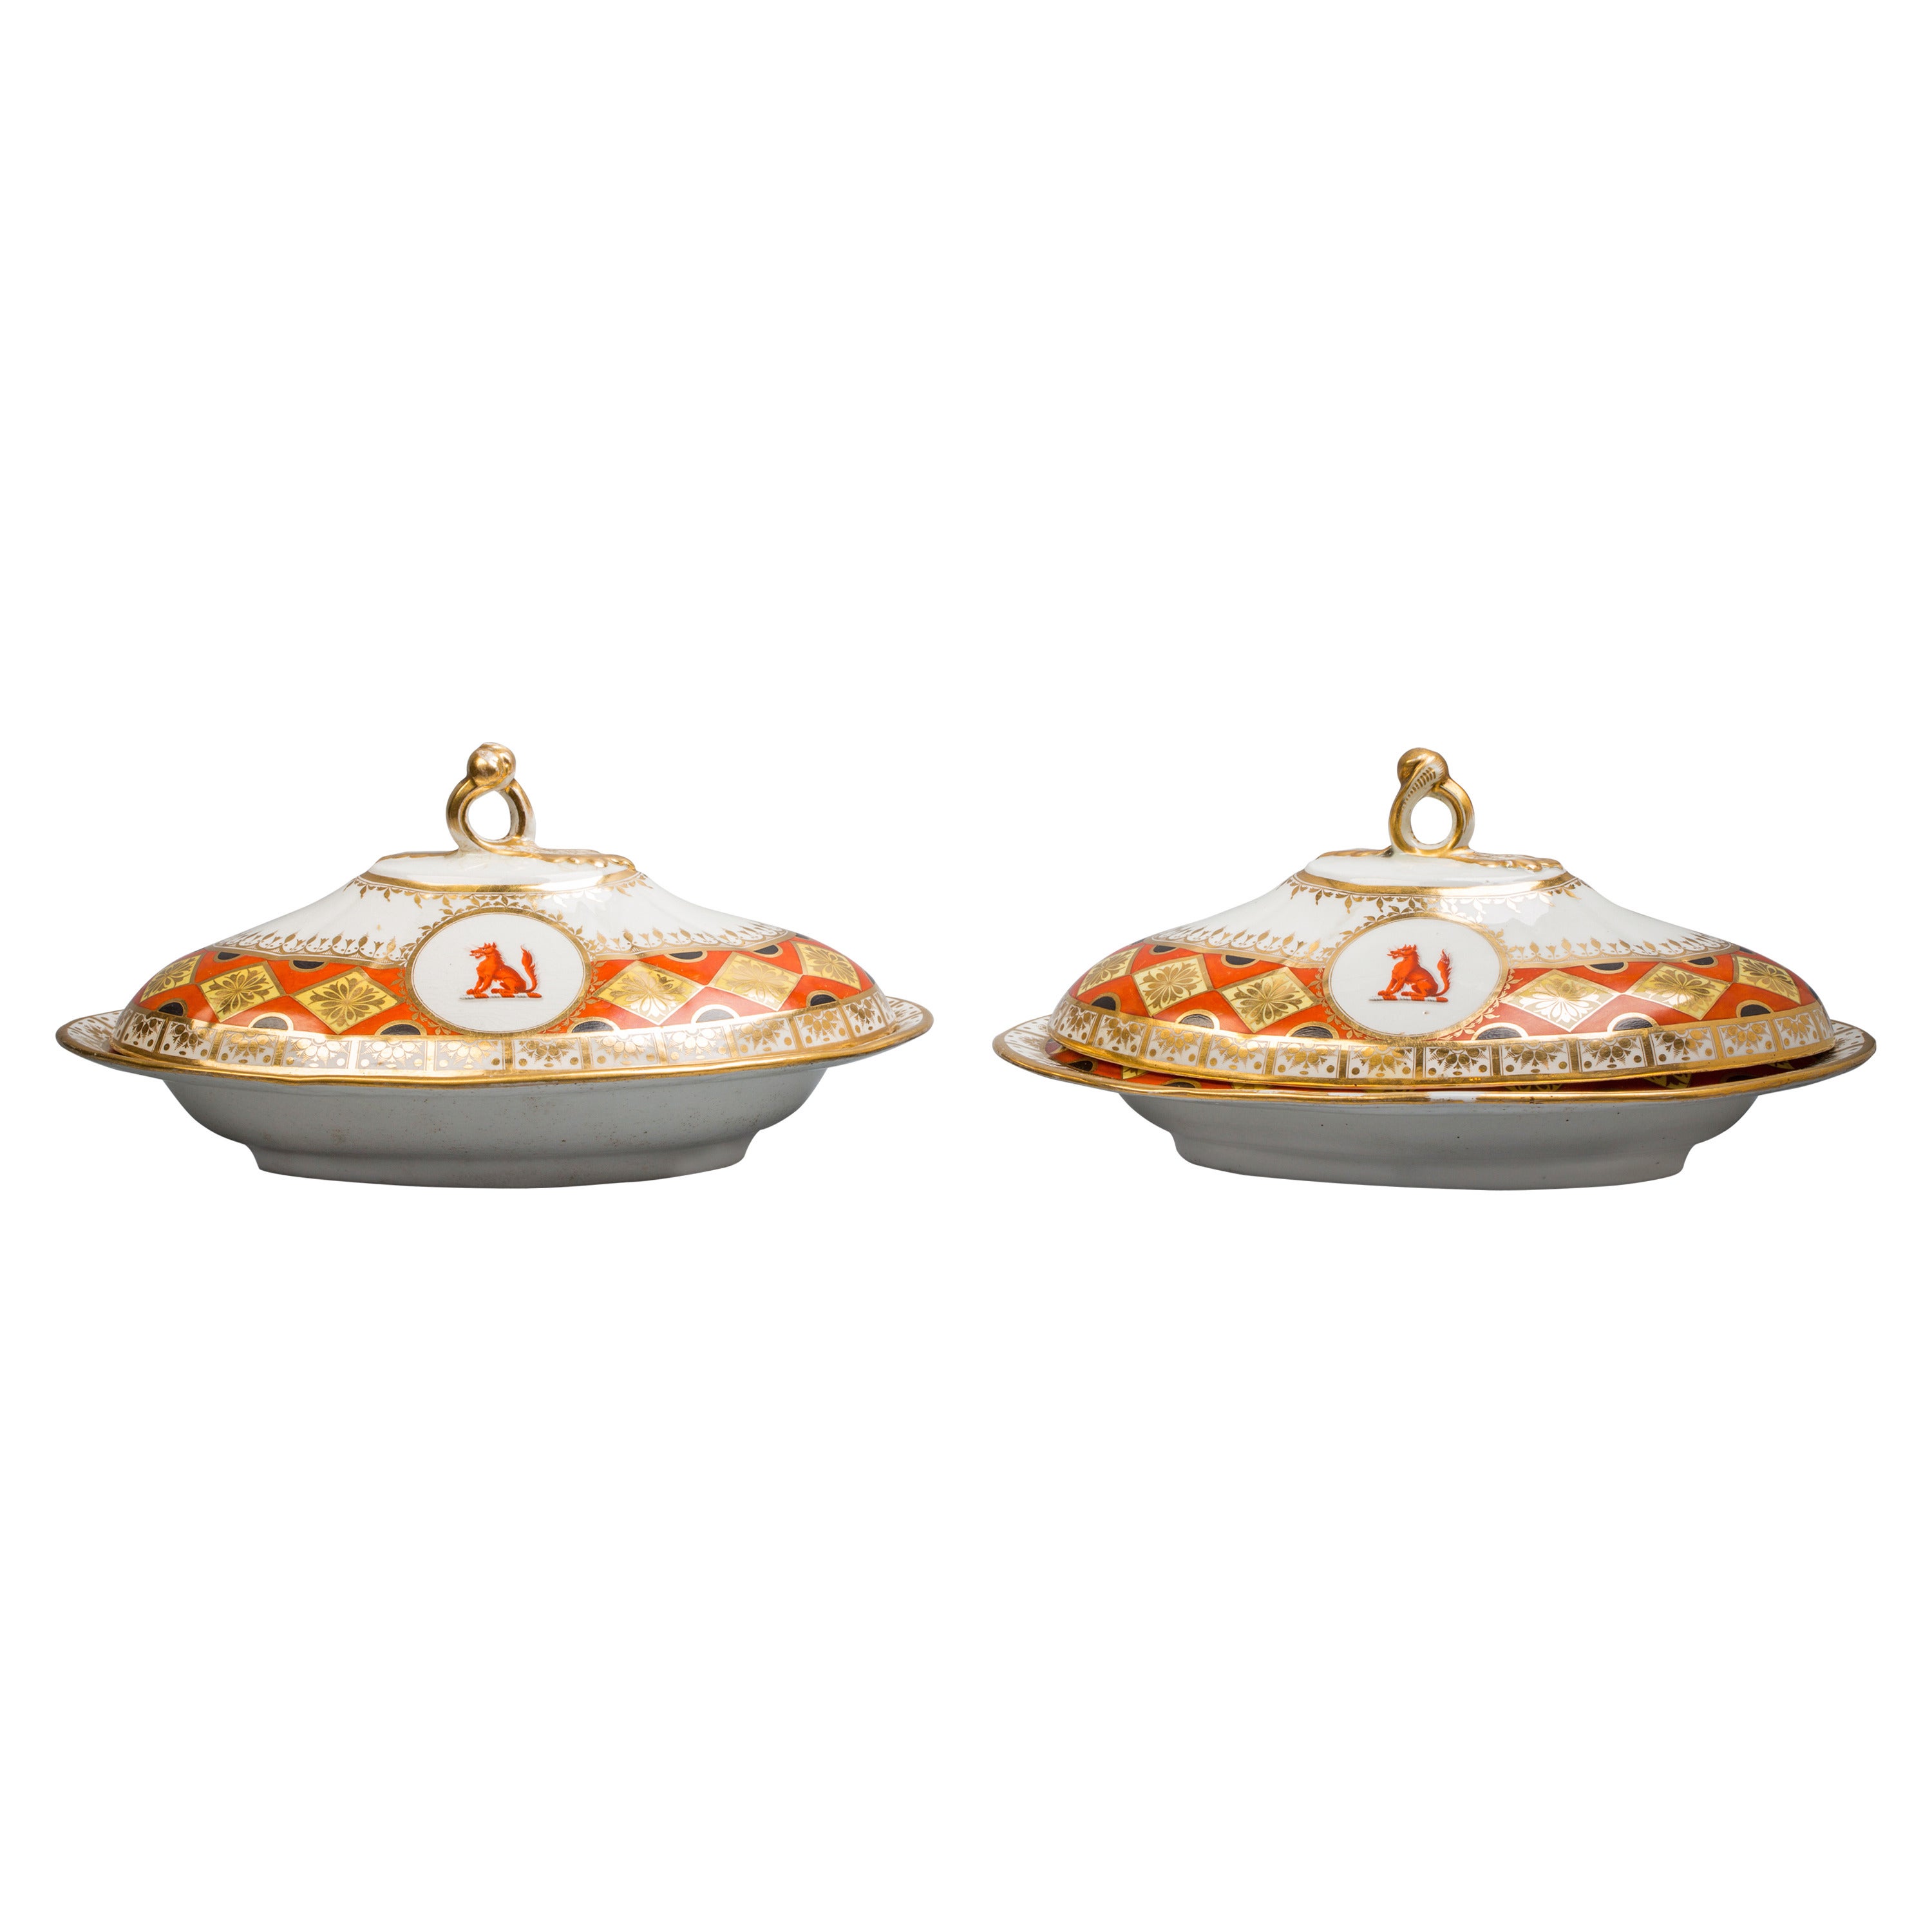 Pair of Chamberlain Worcester Covered Entree Dishes, circa 1820